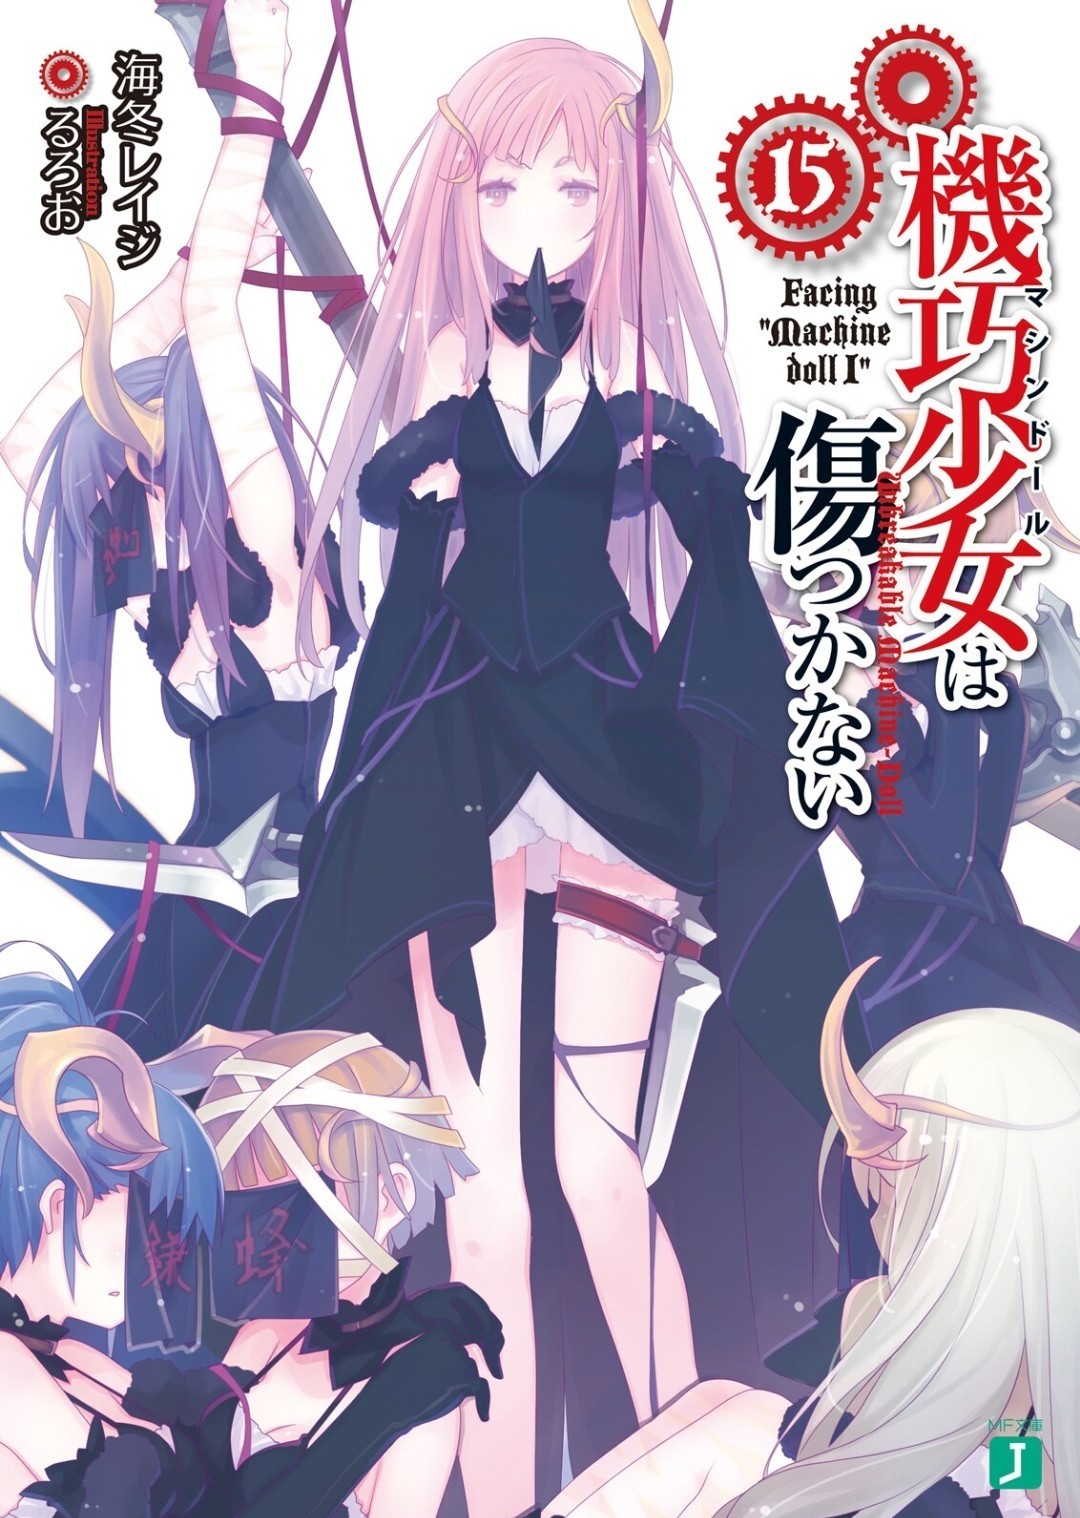 Unbreakable Machine-Doll Facing Burnt Red, Unbreakable Machine-Doll  Encyclopaedia